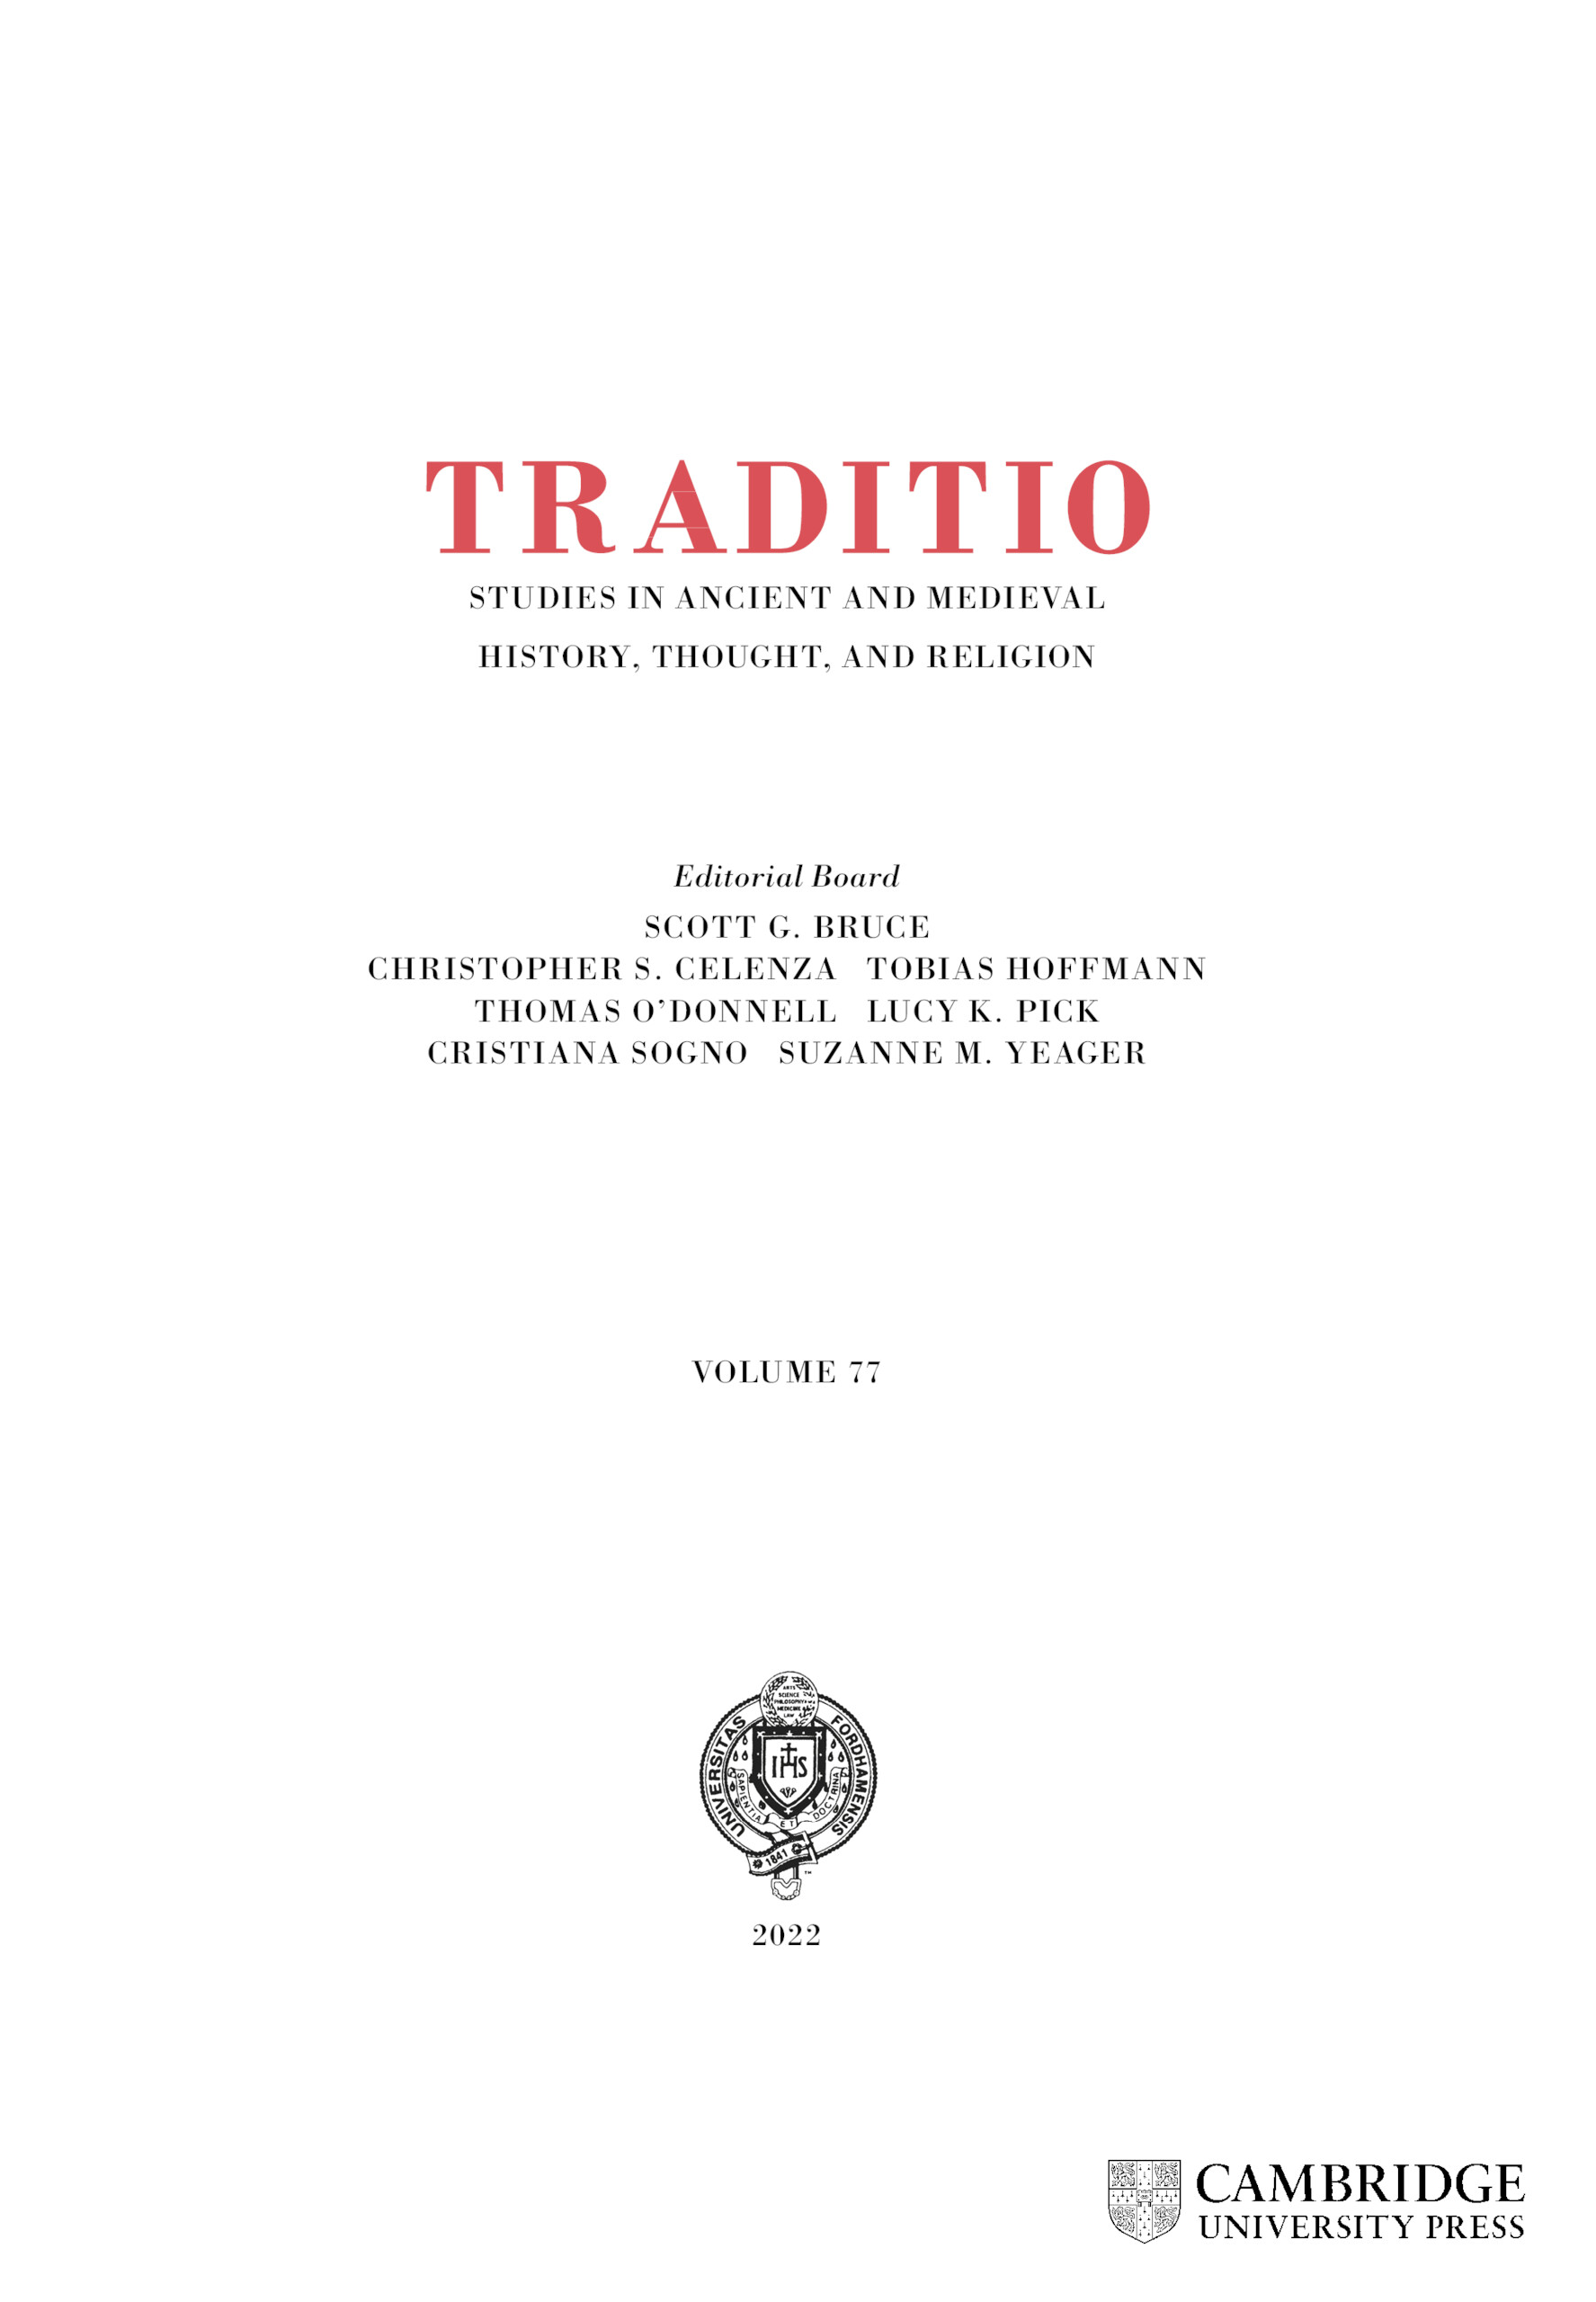 Traditio studies in ancient and medieval history, thought, and religion.